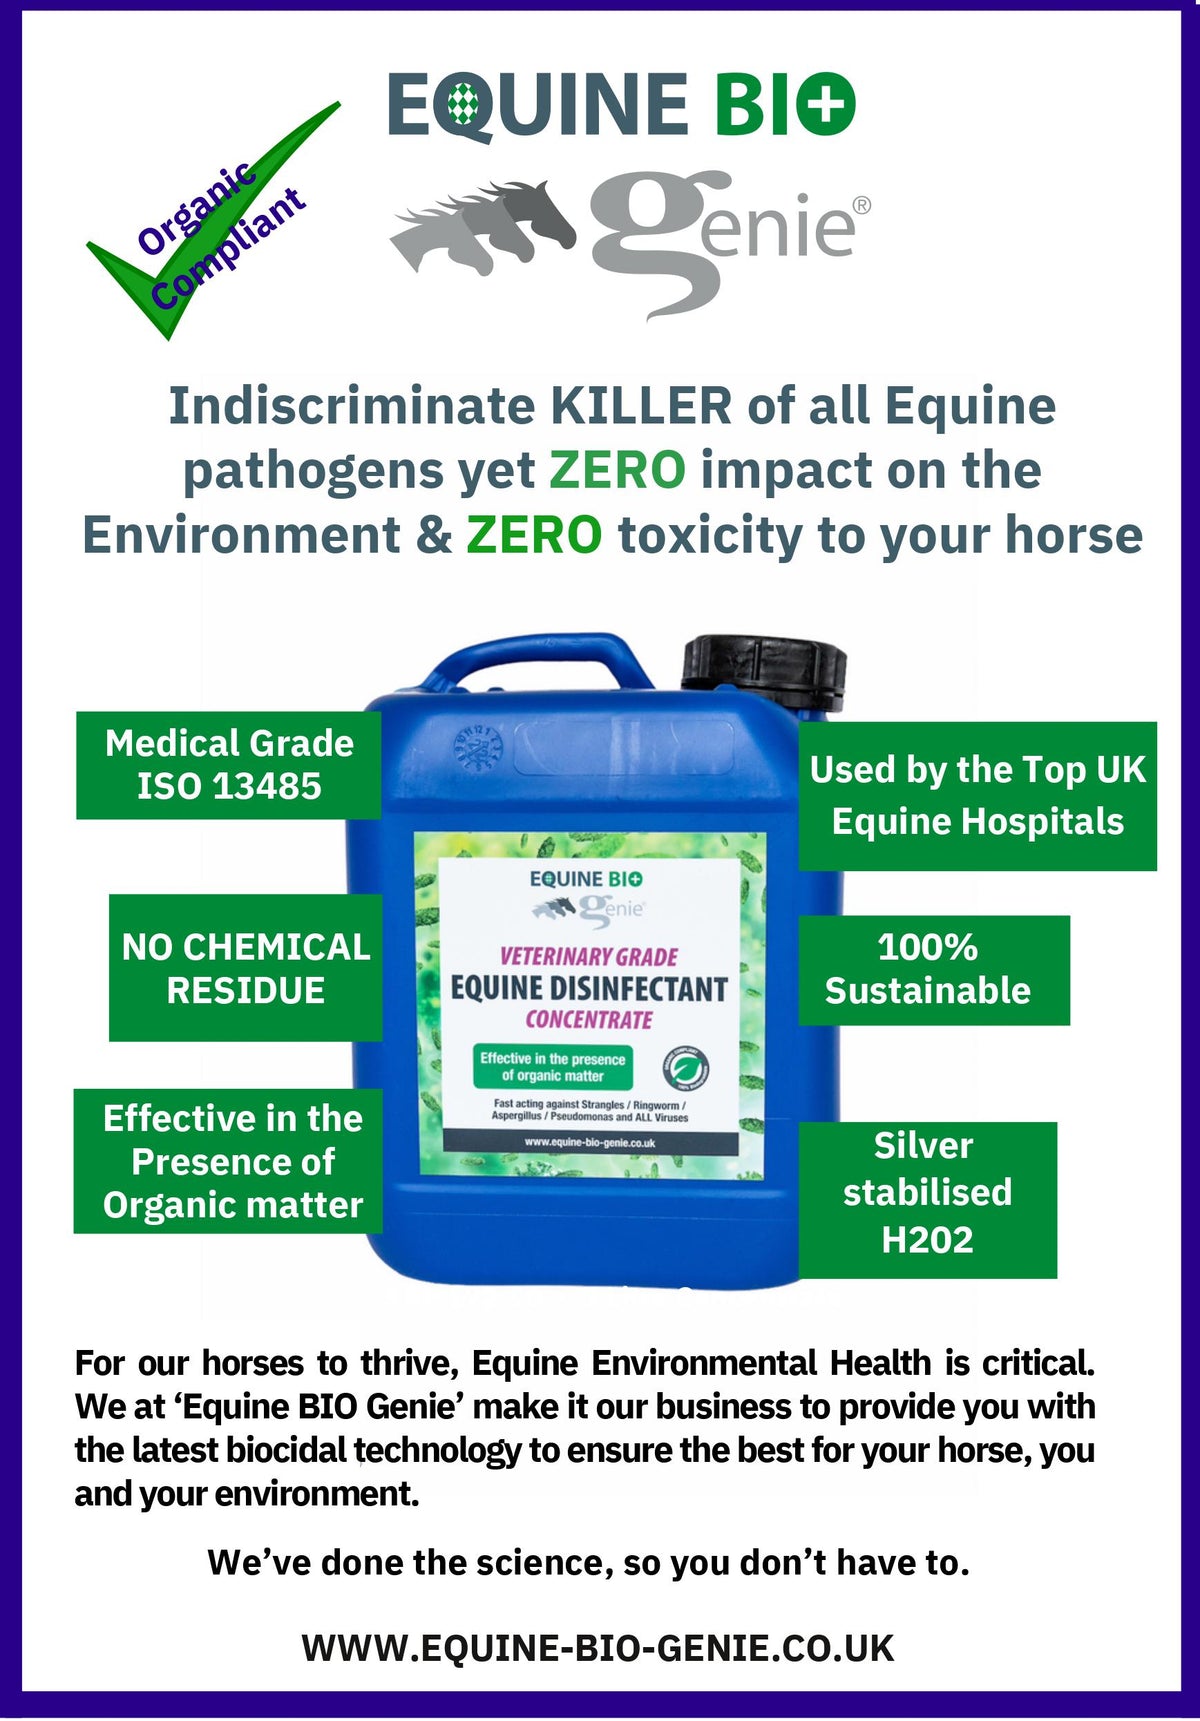 CONCENTRATE (5 Litre) - Equine Bio Fluid - dilution needed